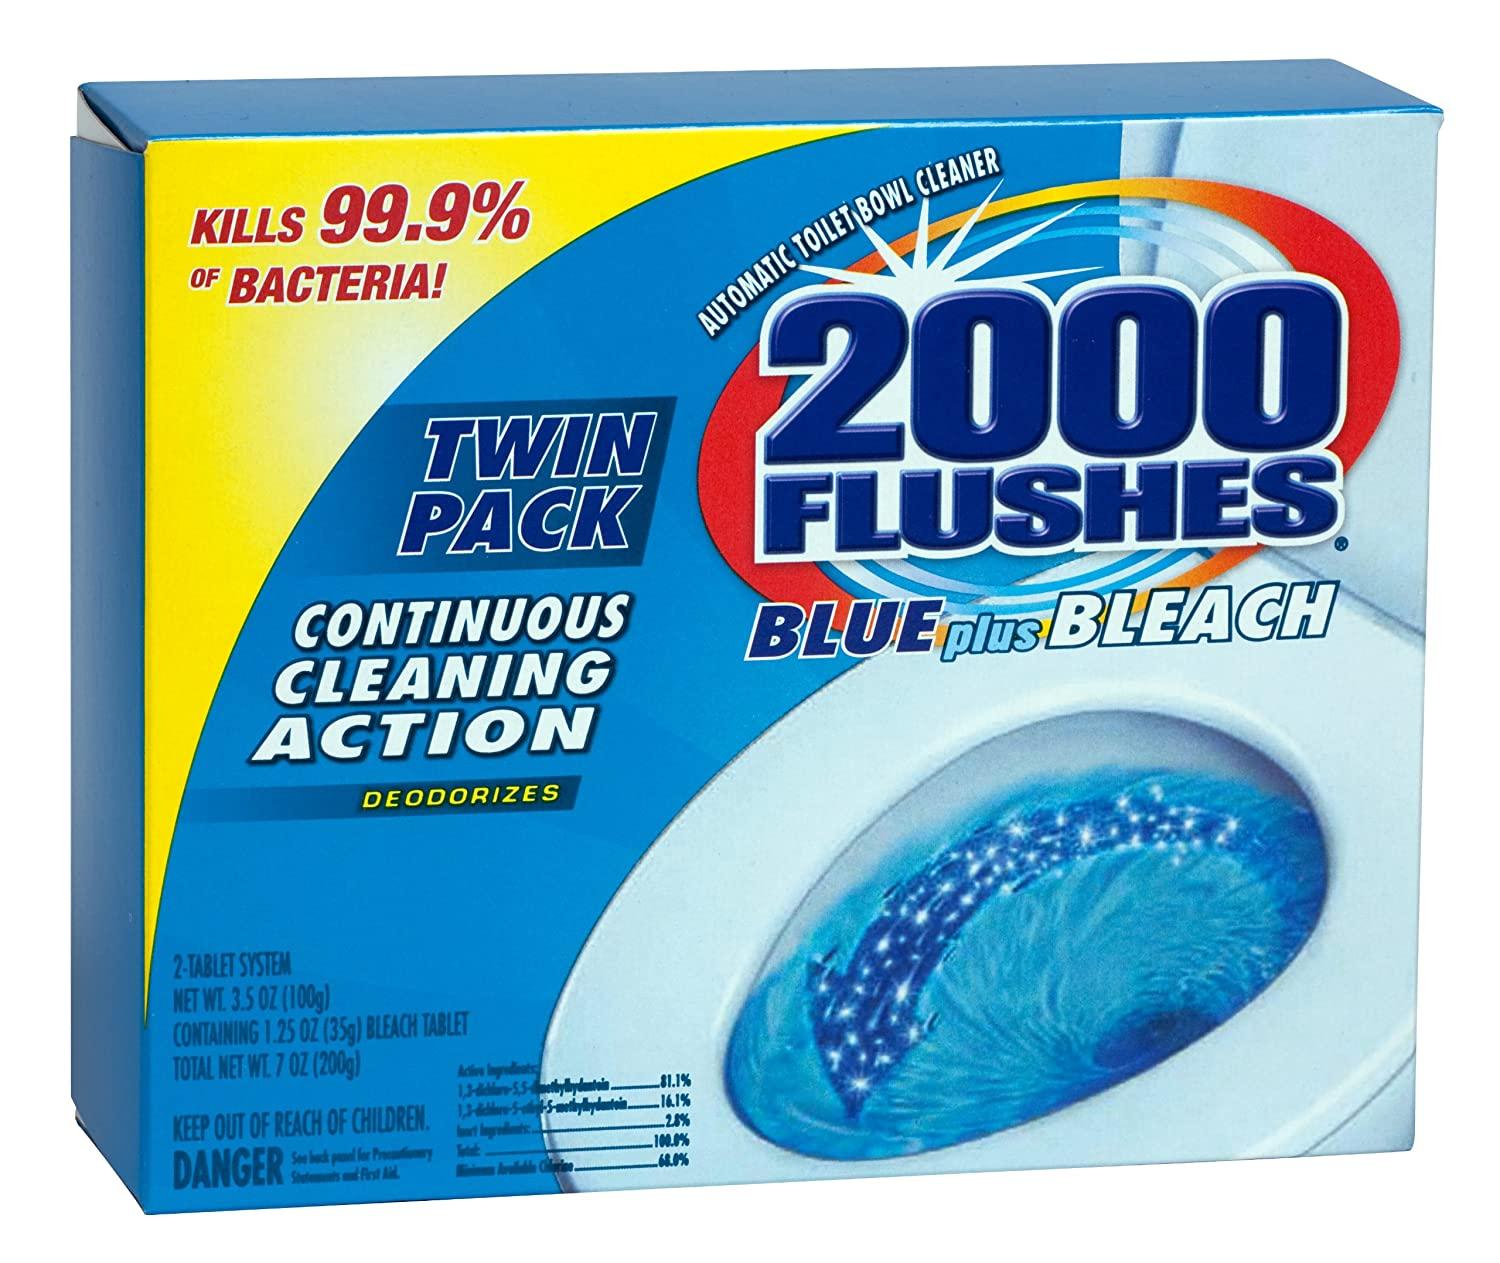 6x 2000 Flushes Blue Plus Bleach Automatic Toilet Bowl Cleaner for $5.98